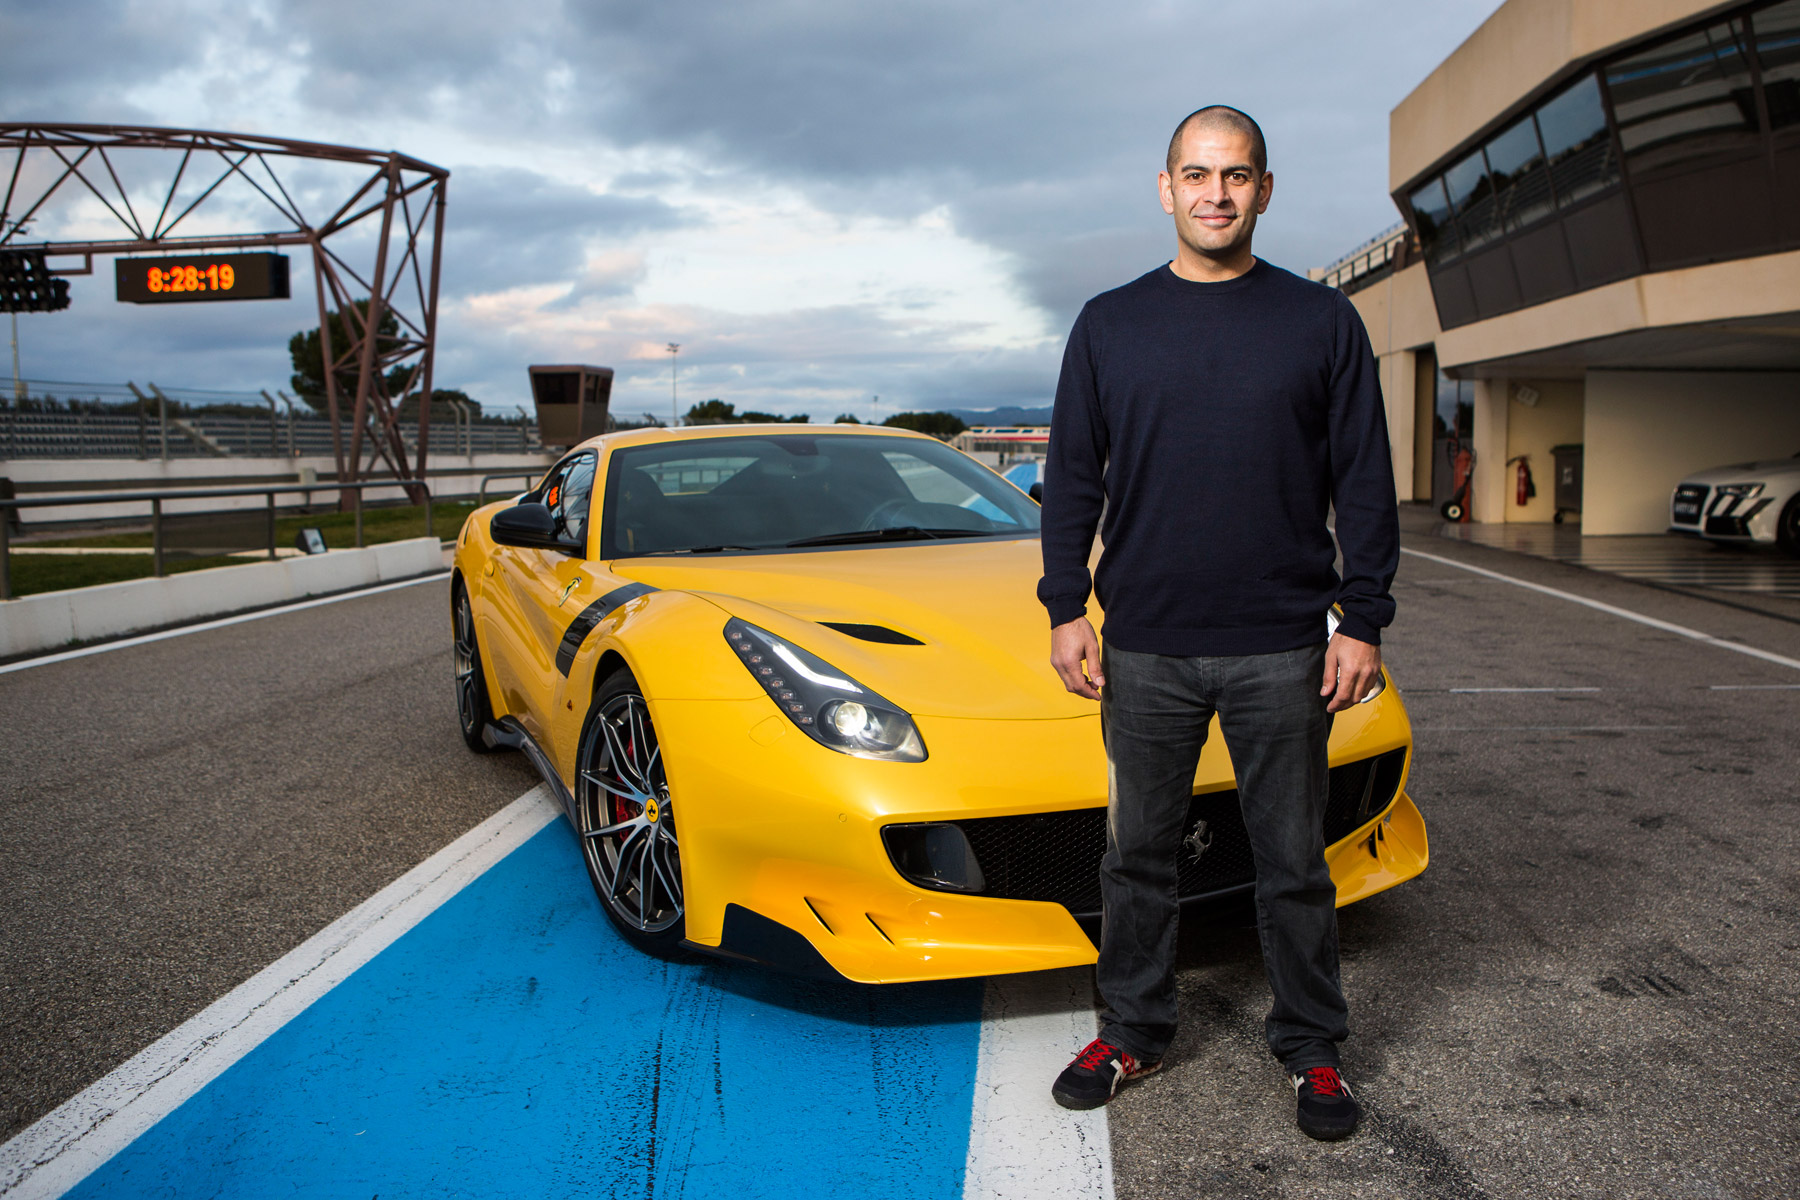 Top Gear’s Chris Harris will create ‘longer, geeky’ films for enthusiasts